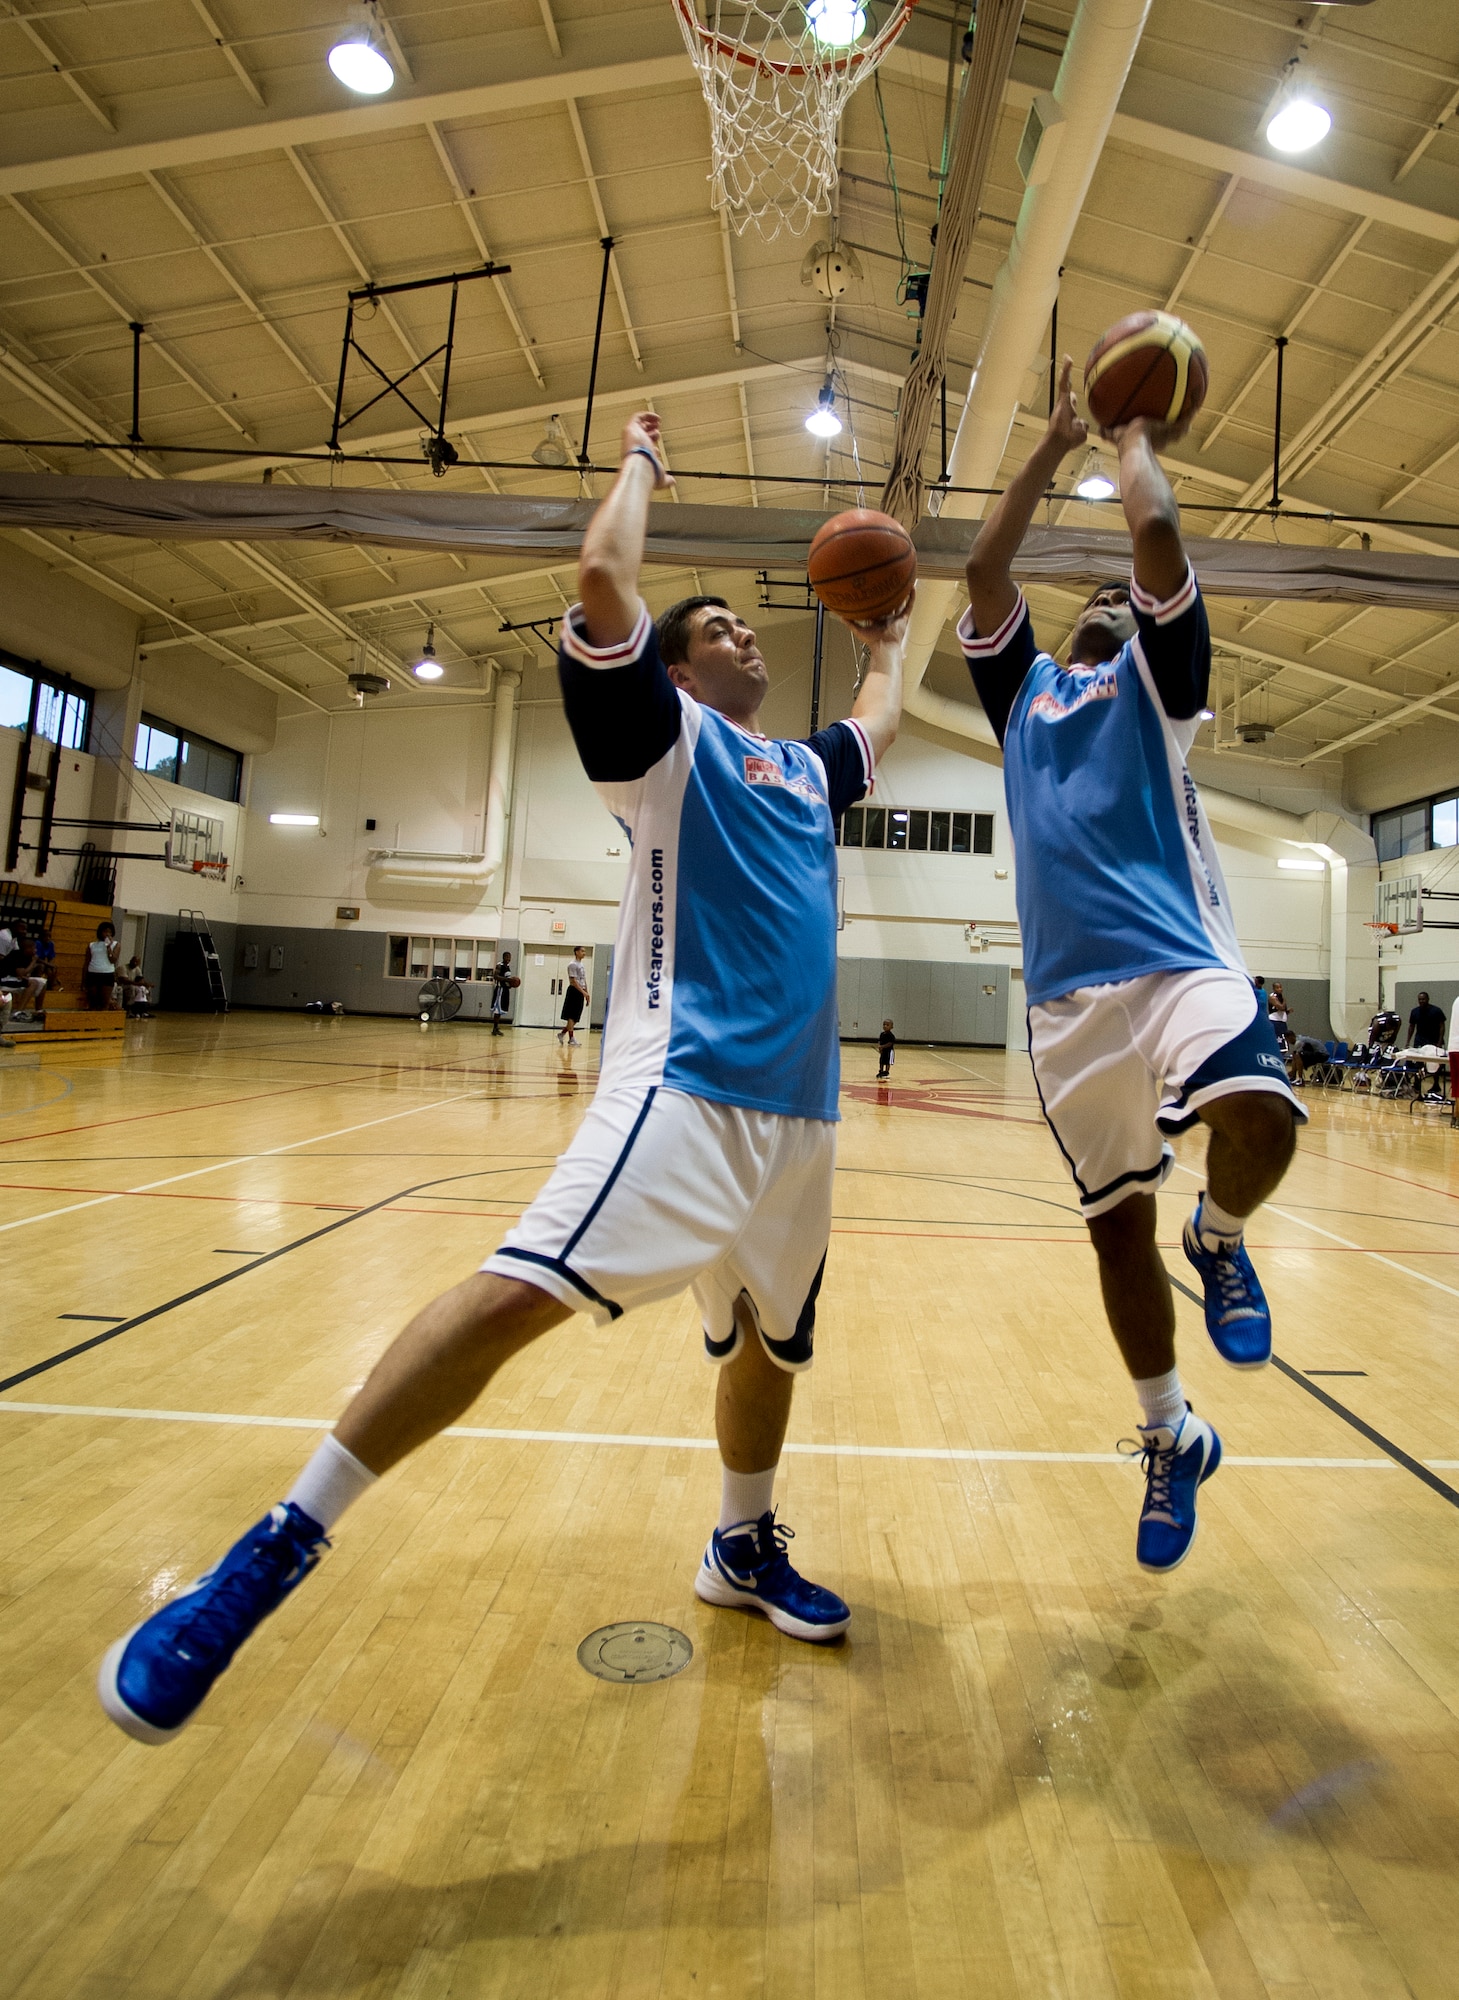 U.K. Royal Air Force lead aircraftsman Warren Birkin (left), a RAF team basketball player, and Sgt. Sunith Defonseka, a RAF team basketball player, warm-up at the Aderholt Gym on Hurlburt Field, Fla., June 20, 2012. Hurlburt Field hosted the RAF during a two-week basketball camp. (U.S. Air Force photo by Airman 1st Class Christopher Williams) (RELEASED)